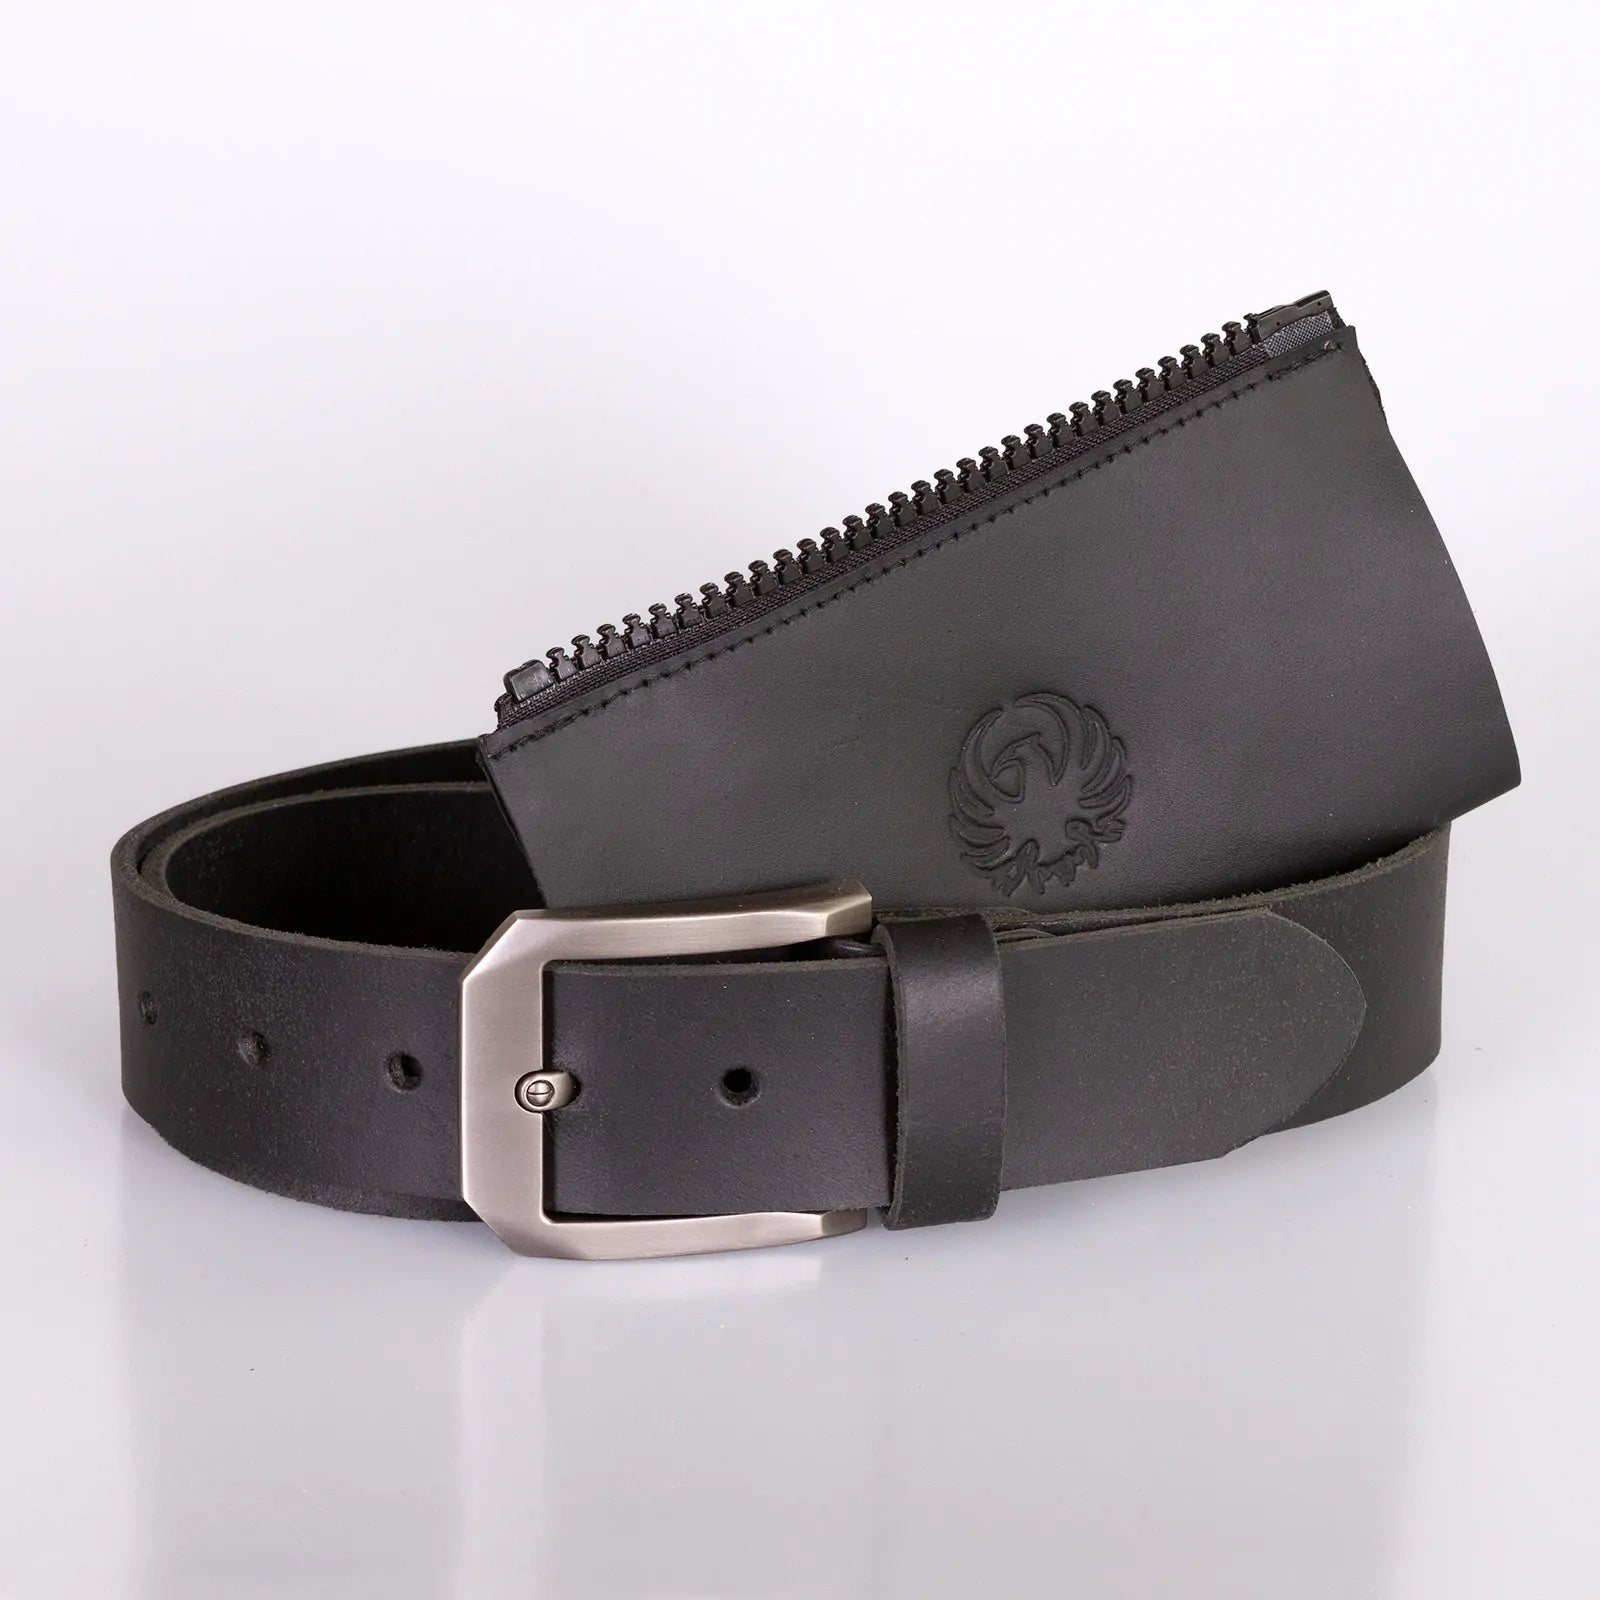 Merlin Womens Leather Connecting Belt Black